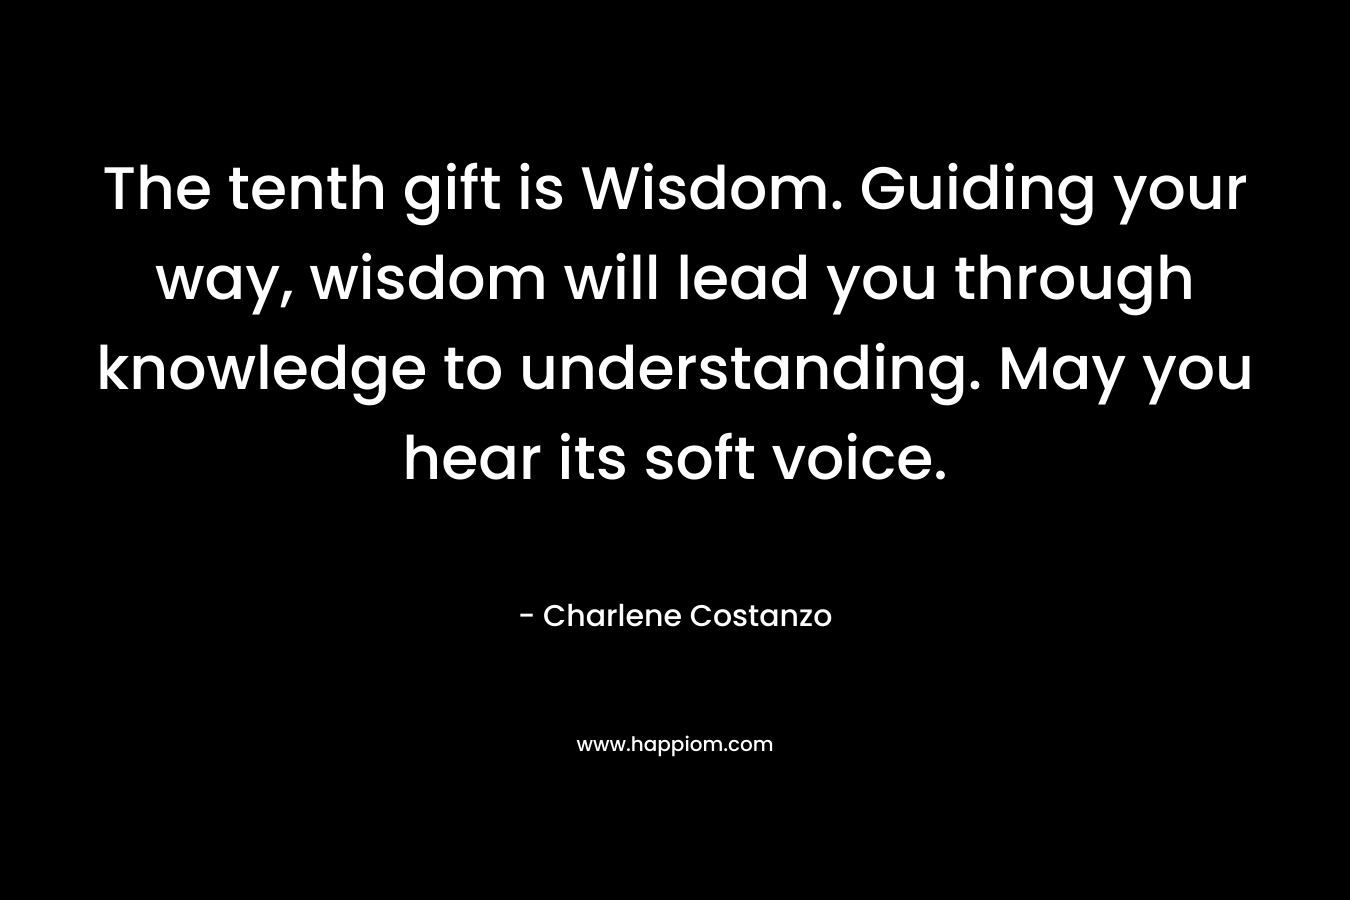 The tenth gift is Wisdom. Guiding your way, wisdom will lead you through knowledge to understanding. May you hear its soft voice.